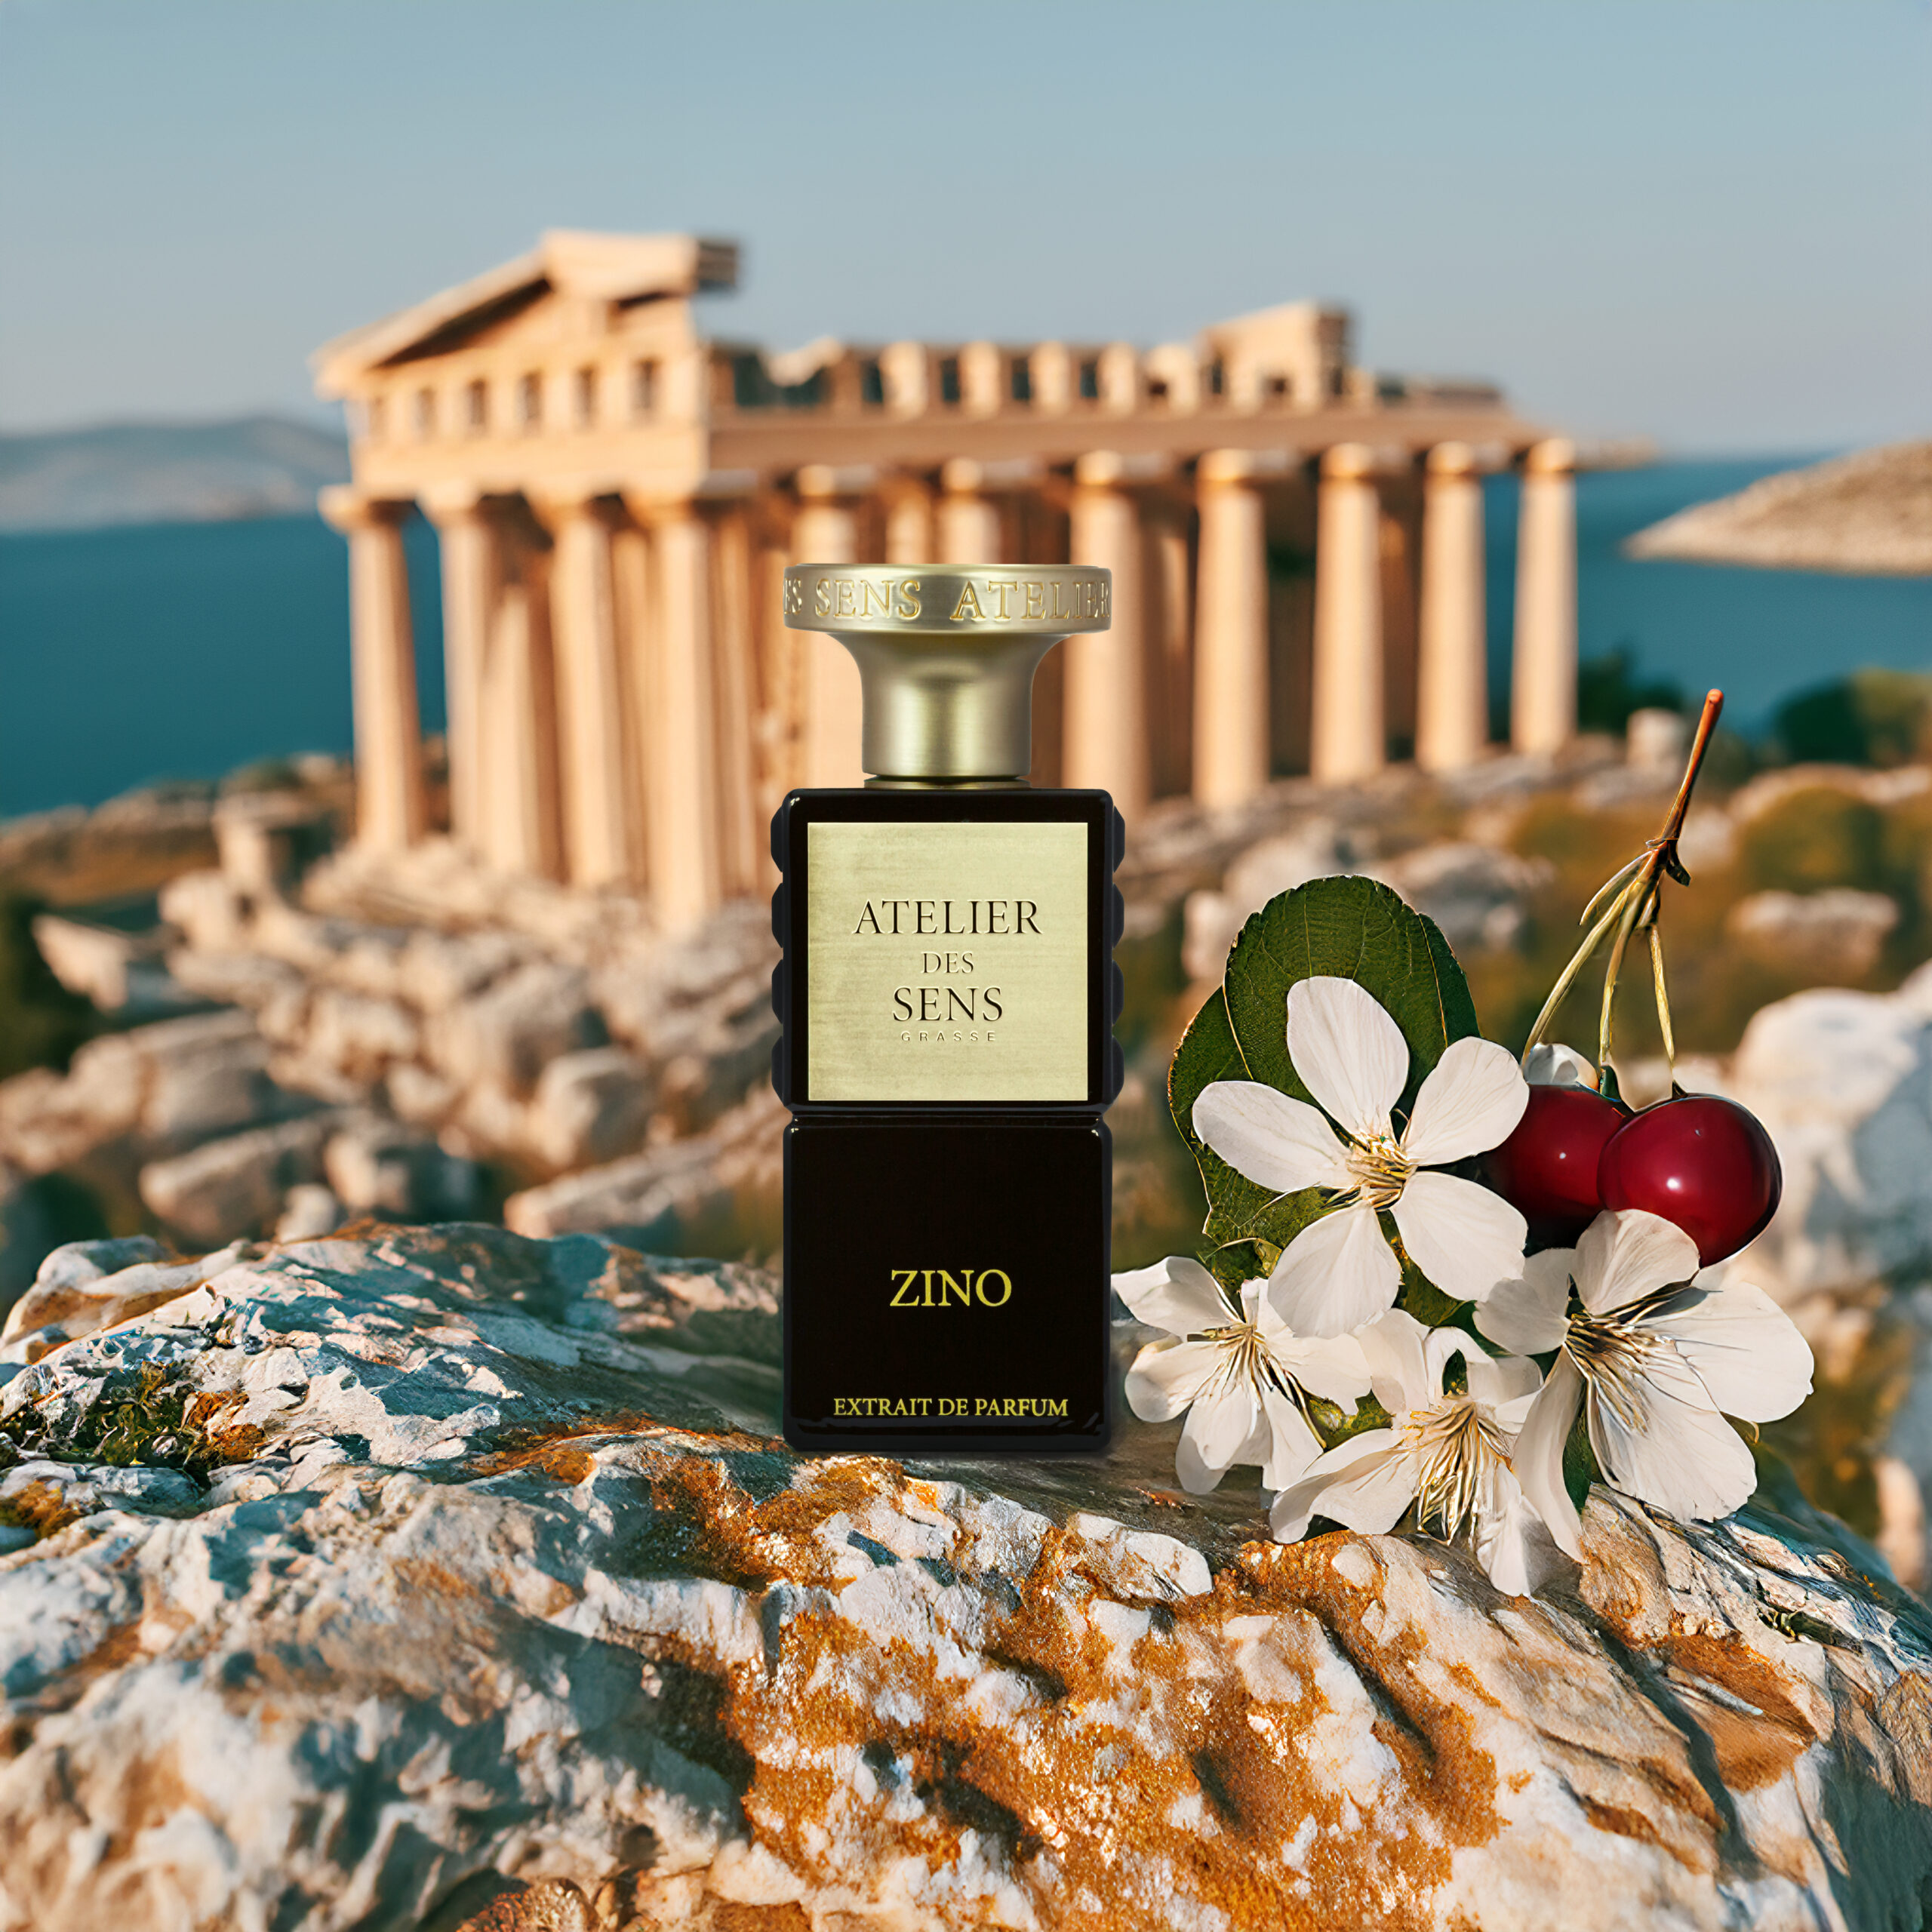 a bottle of perfume on a rock with flowers and cherries in the background